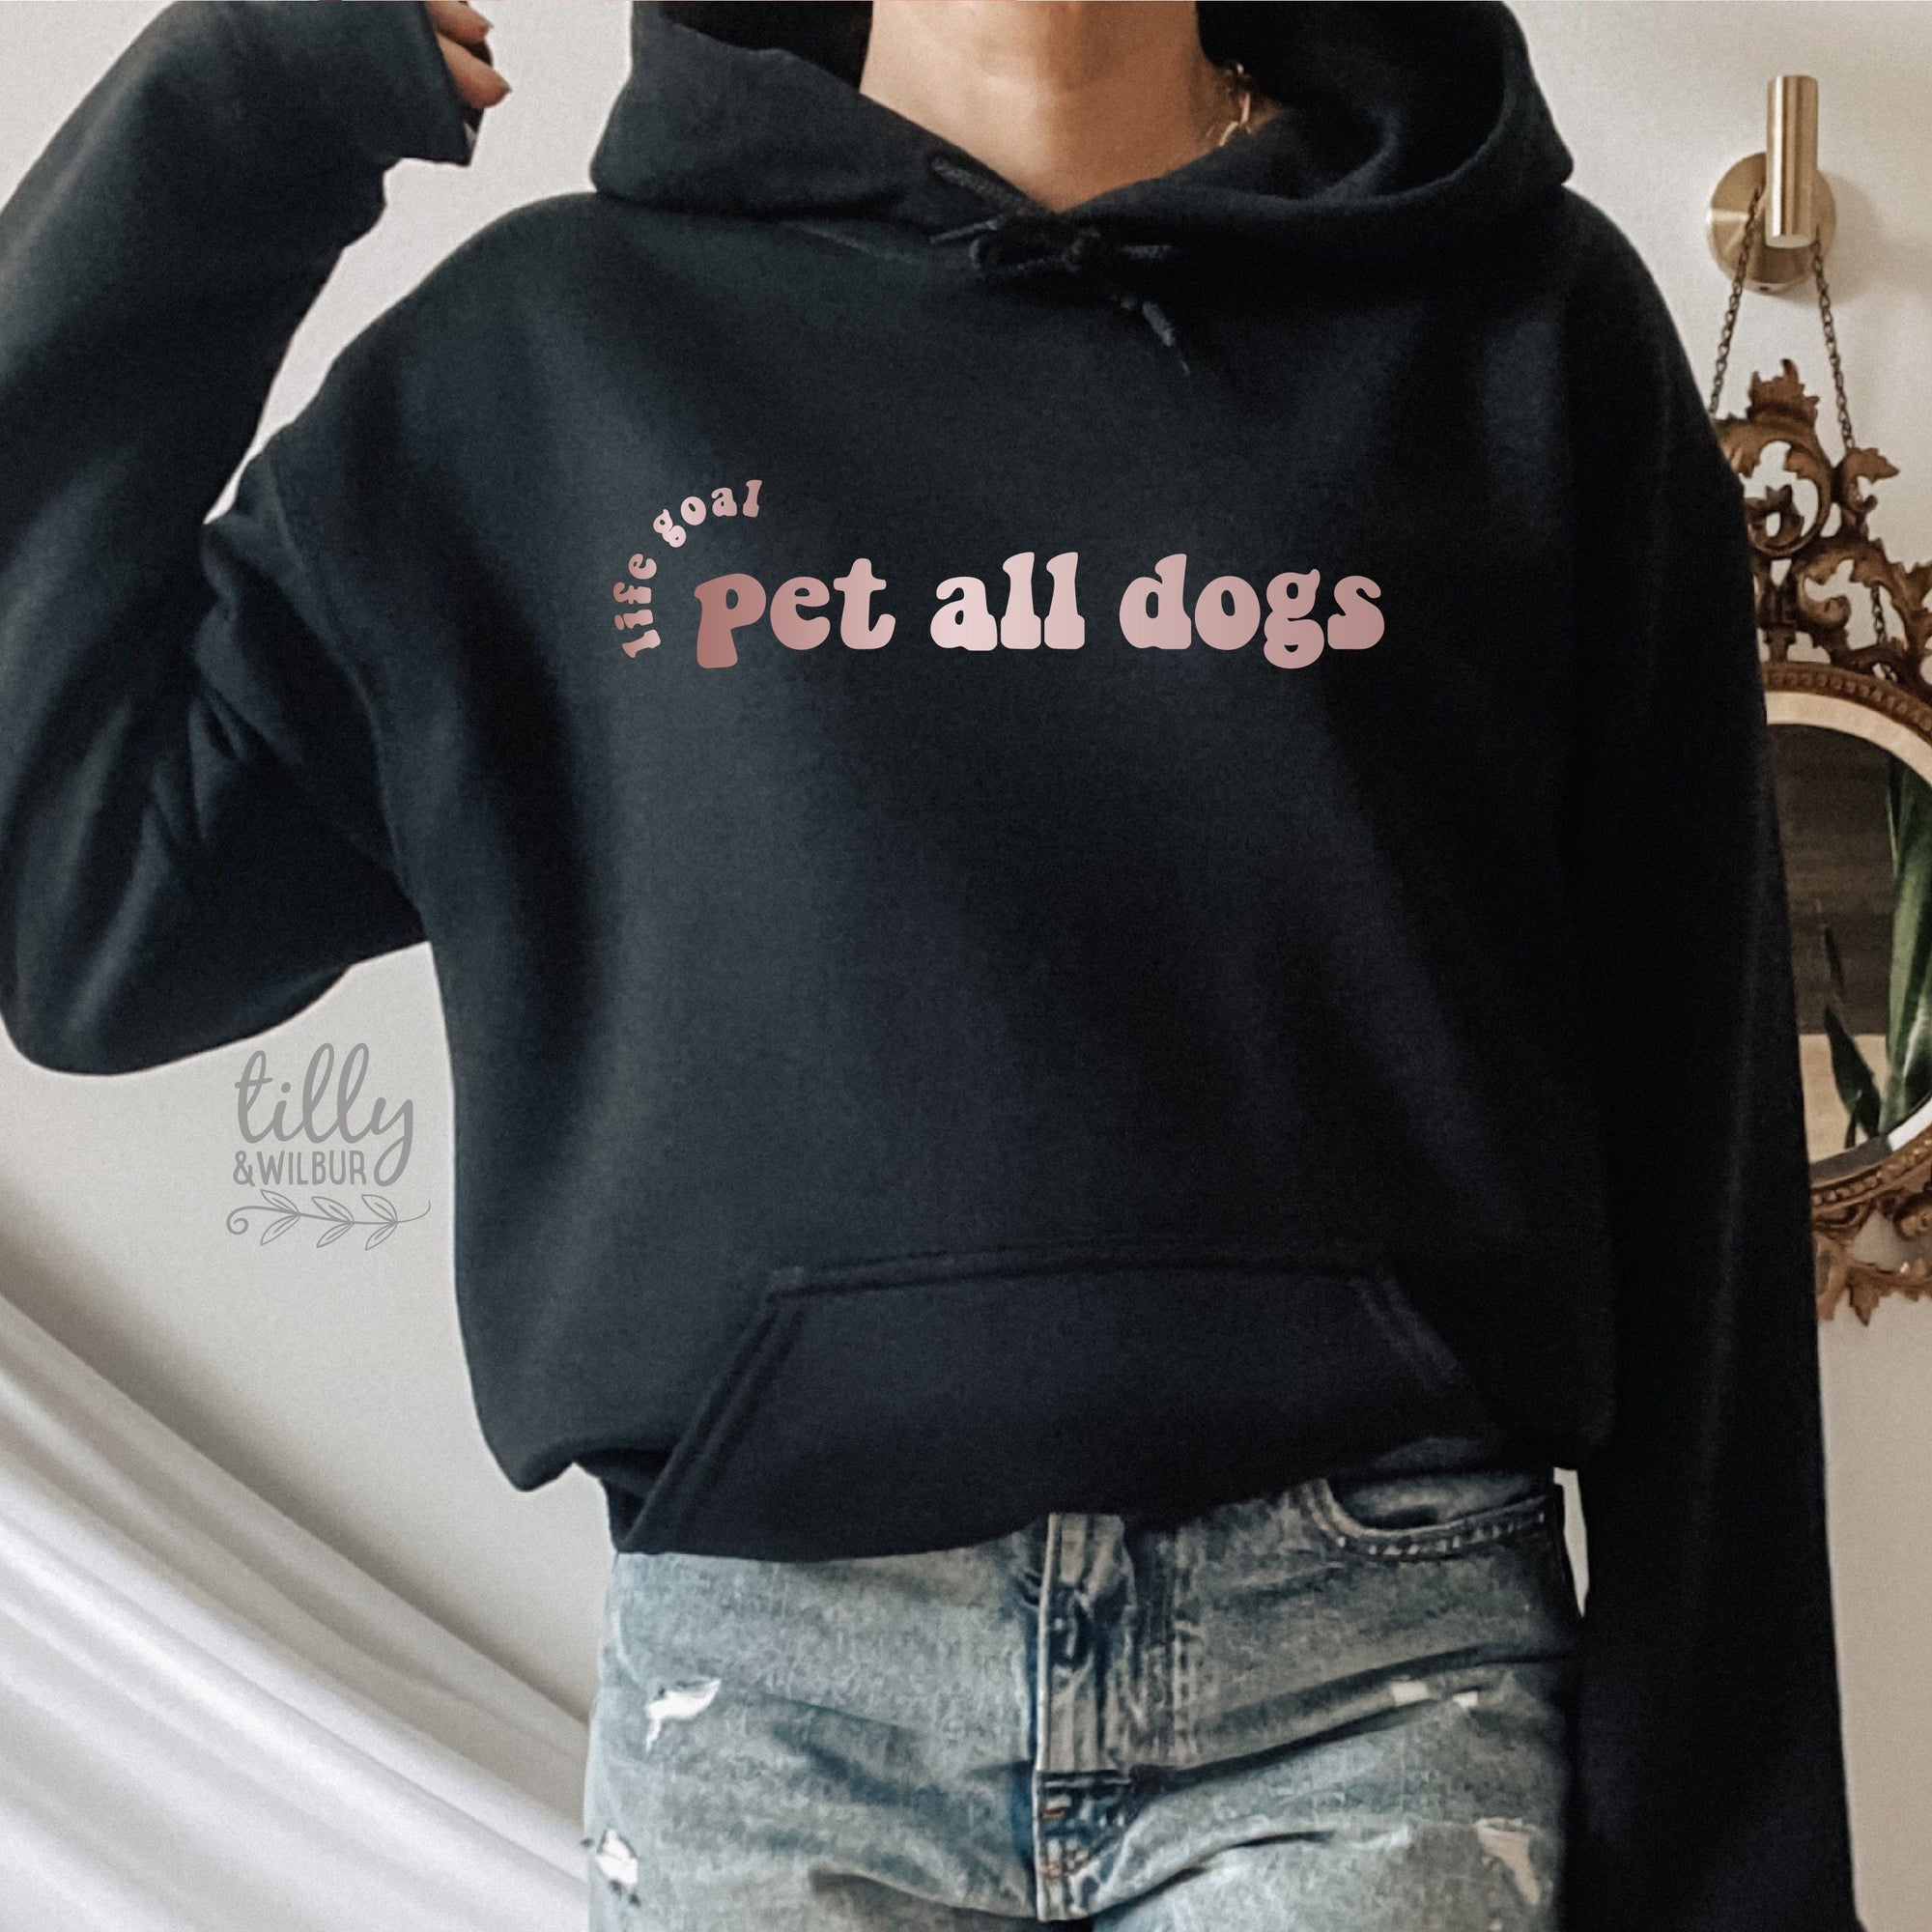 Life Goal Must Pet All Dogs Hoodie, I Love Dogs Women's Sweatshirt, Funny Jumper, I Love Dogs T-Shirt, Funny Women's T-Shirt, Gift For Her